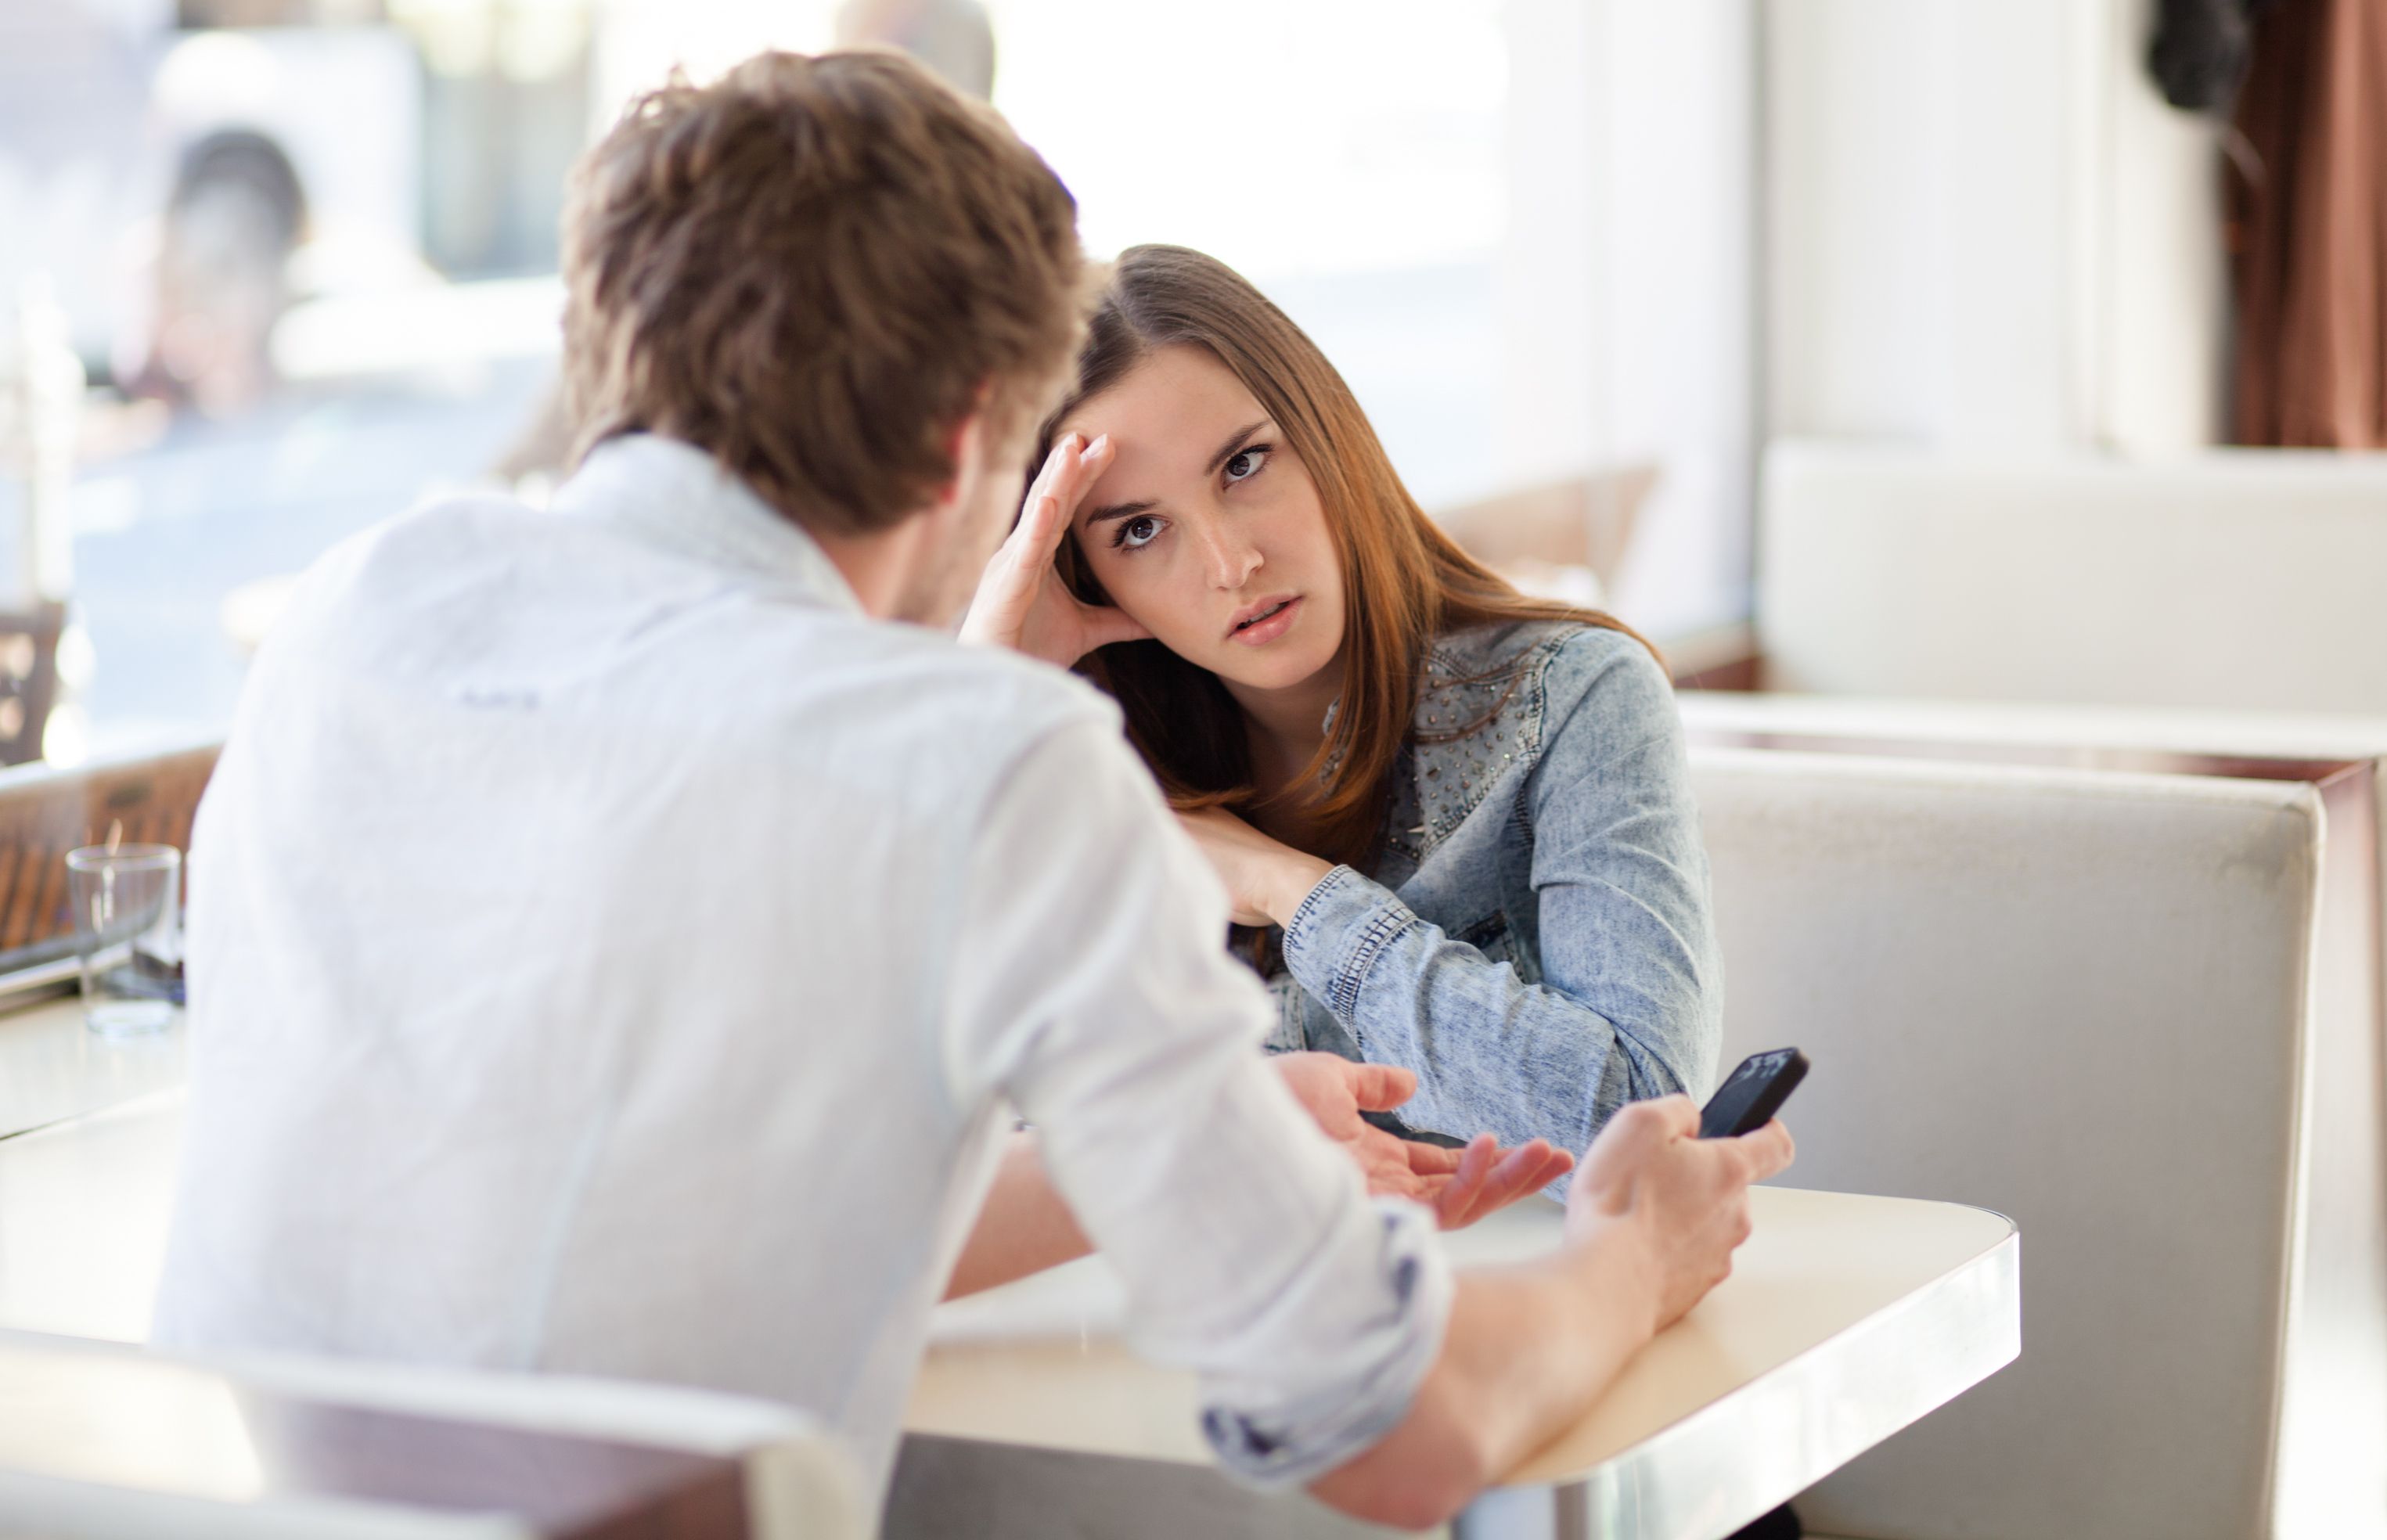 A woman looks upset while sitting in front of a man. | Source: Shutterstock